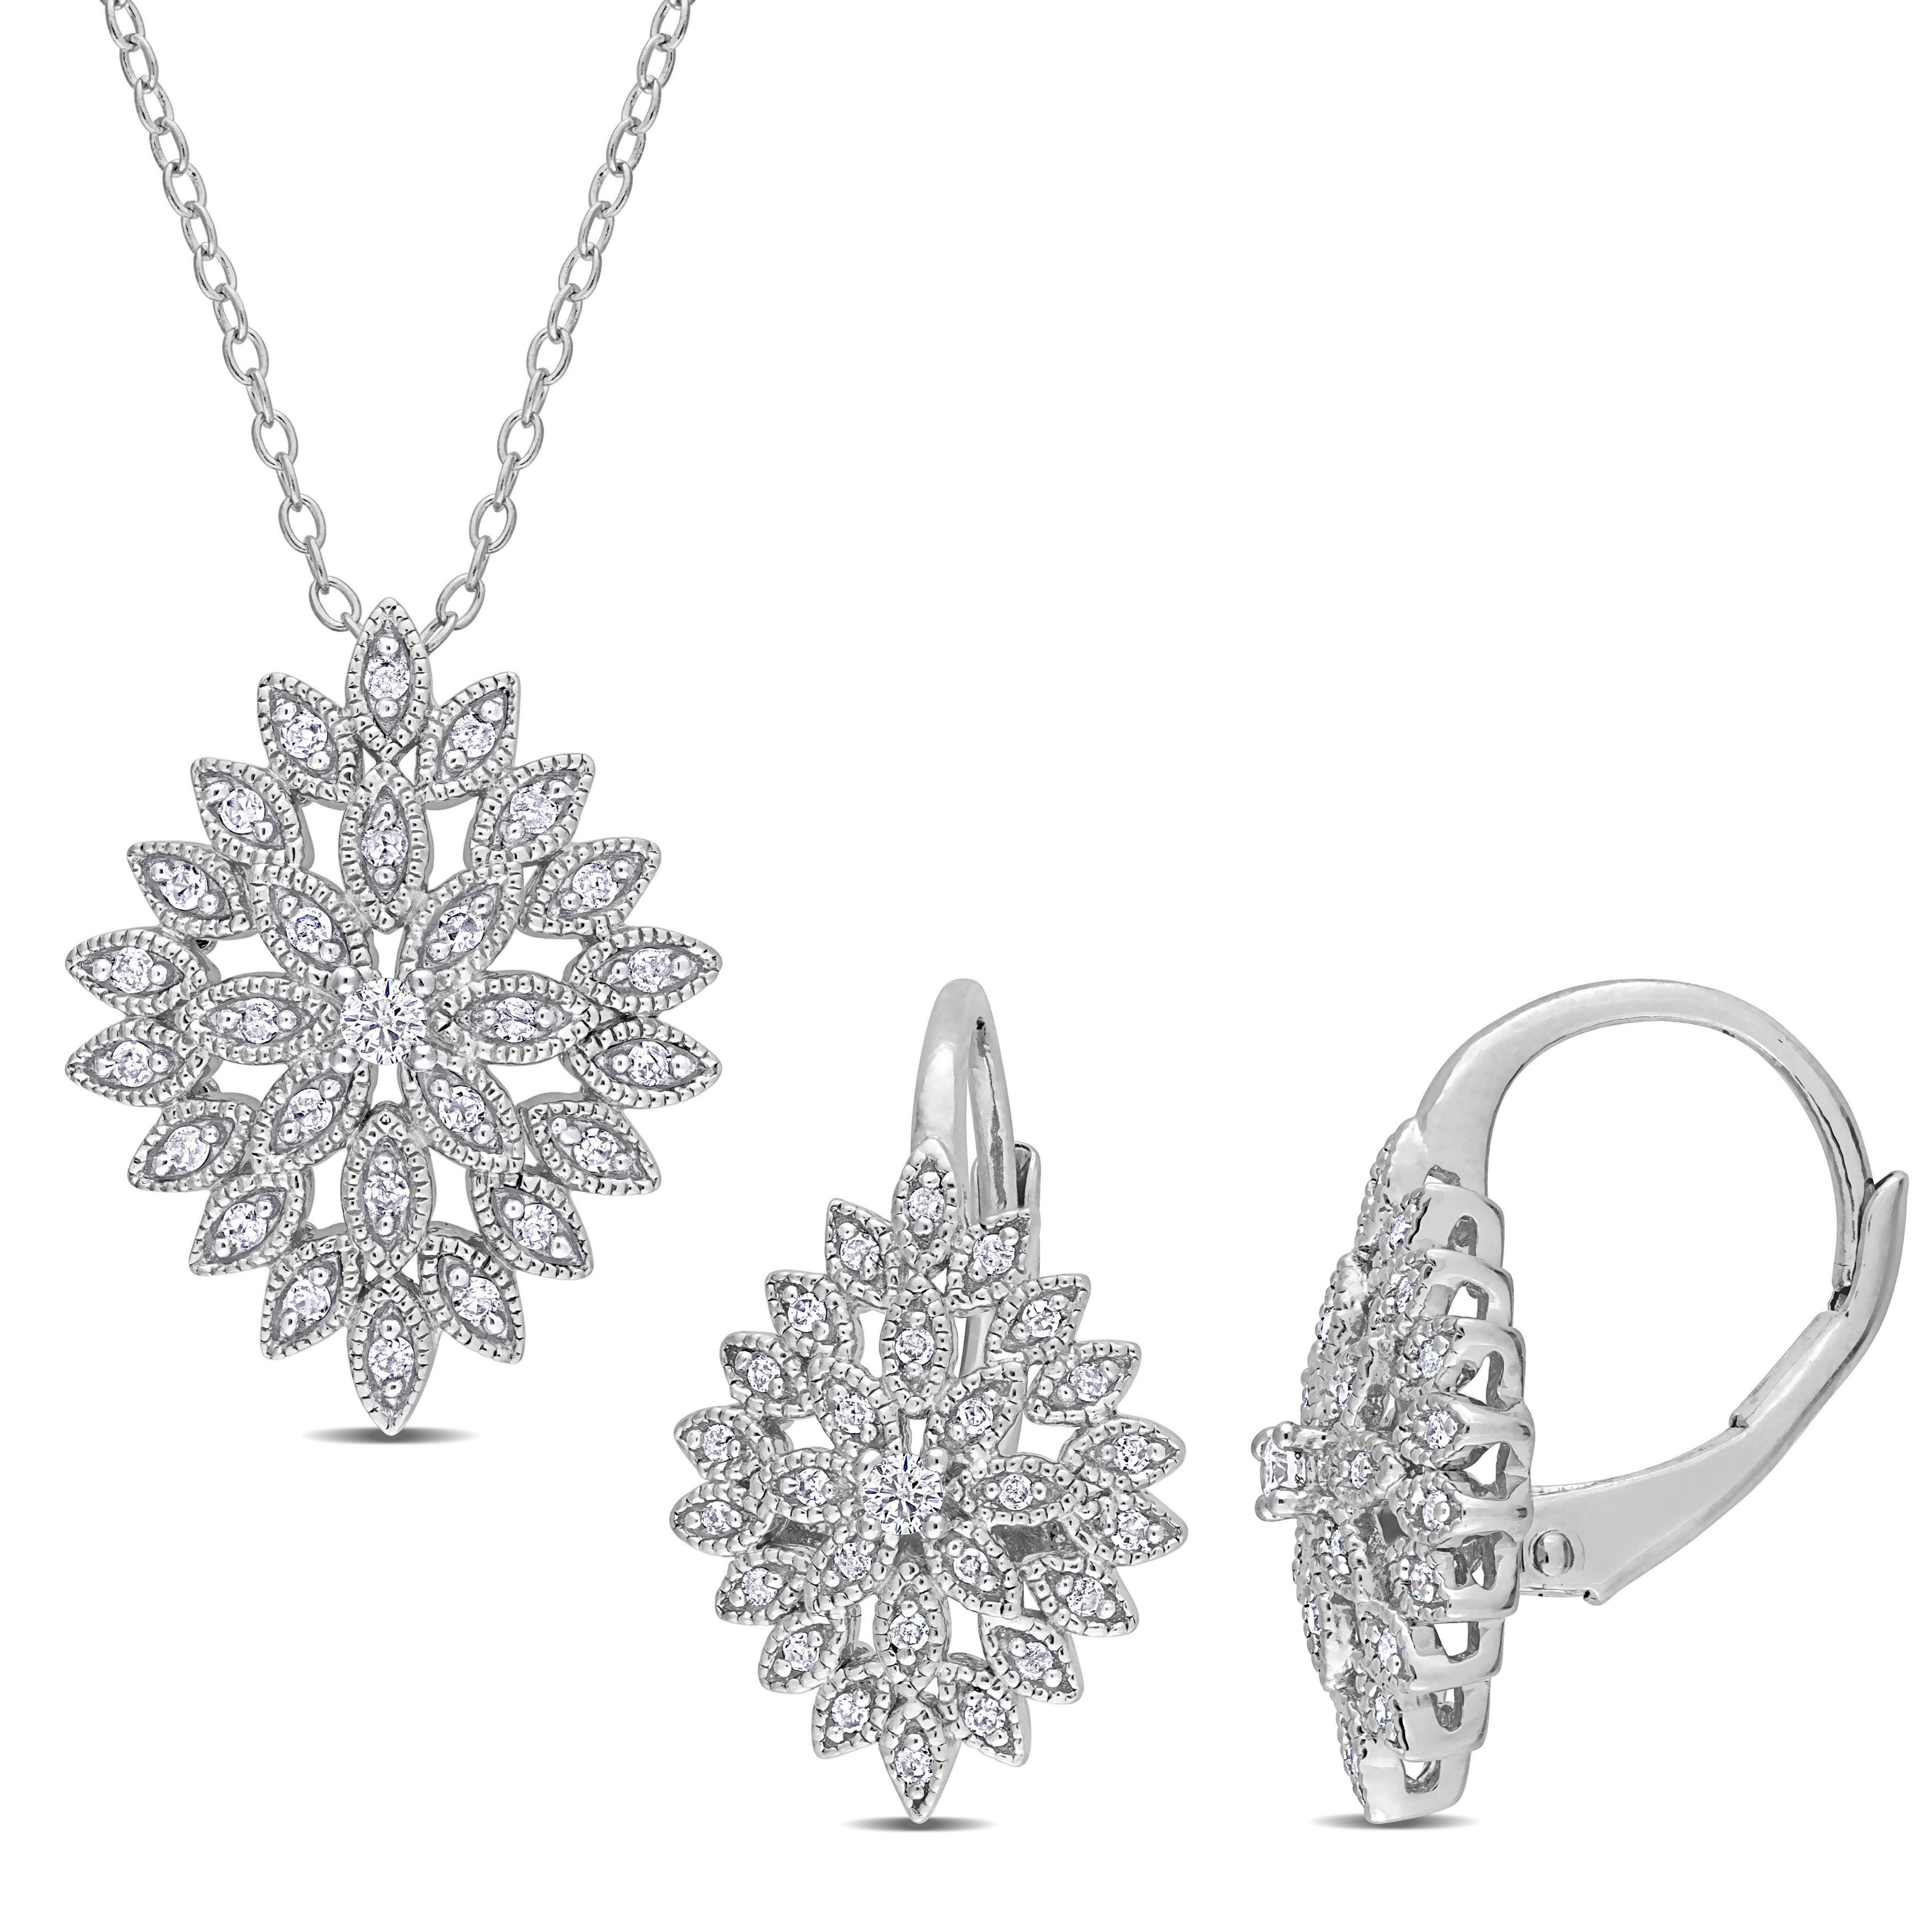 1/2 CT TDW Diamond Cluster 2-Piece Leverback Earrings and Necklace Set in Sterling Silver